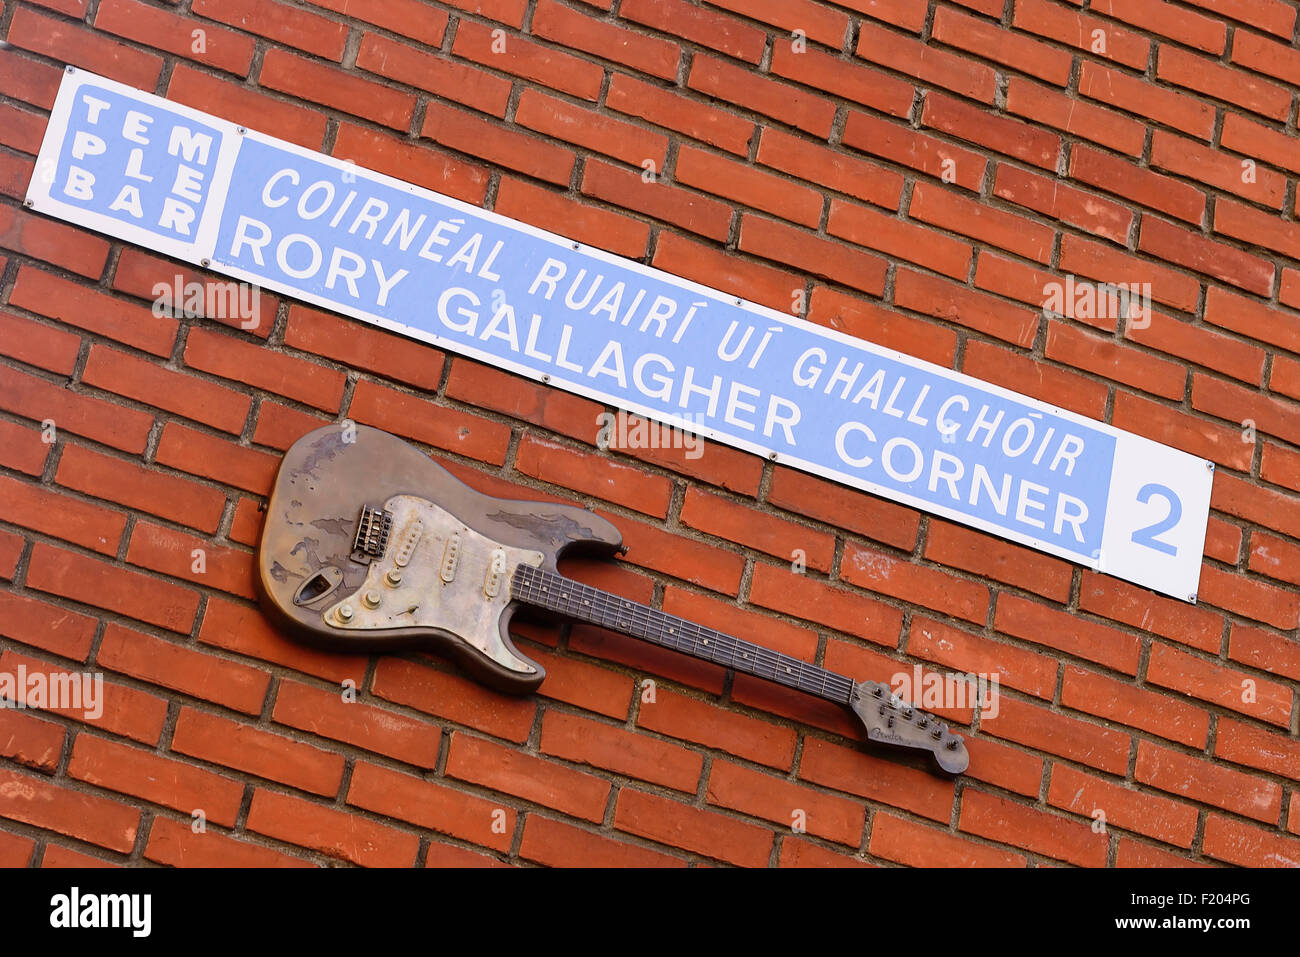 Ireland County Dublin Dublin City Temple Bar Wall dedicated to Ireland's legendary blues guitarist Rory Gallagher and known as Stock Photo